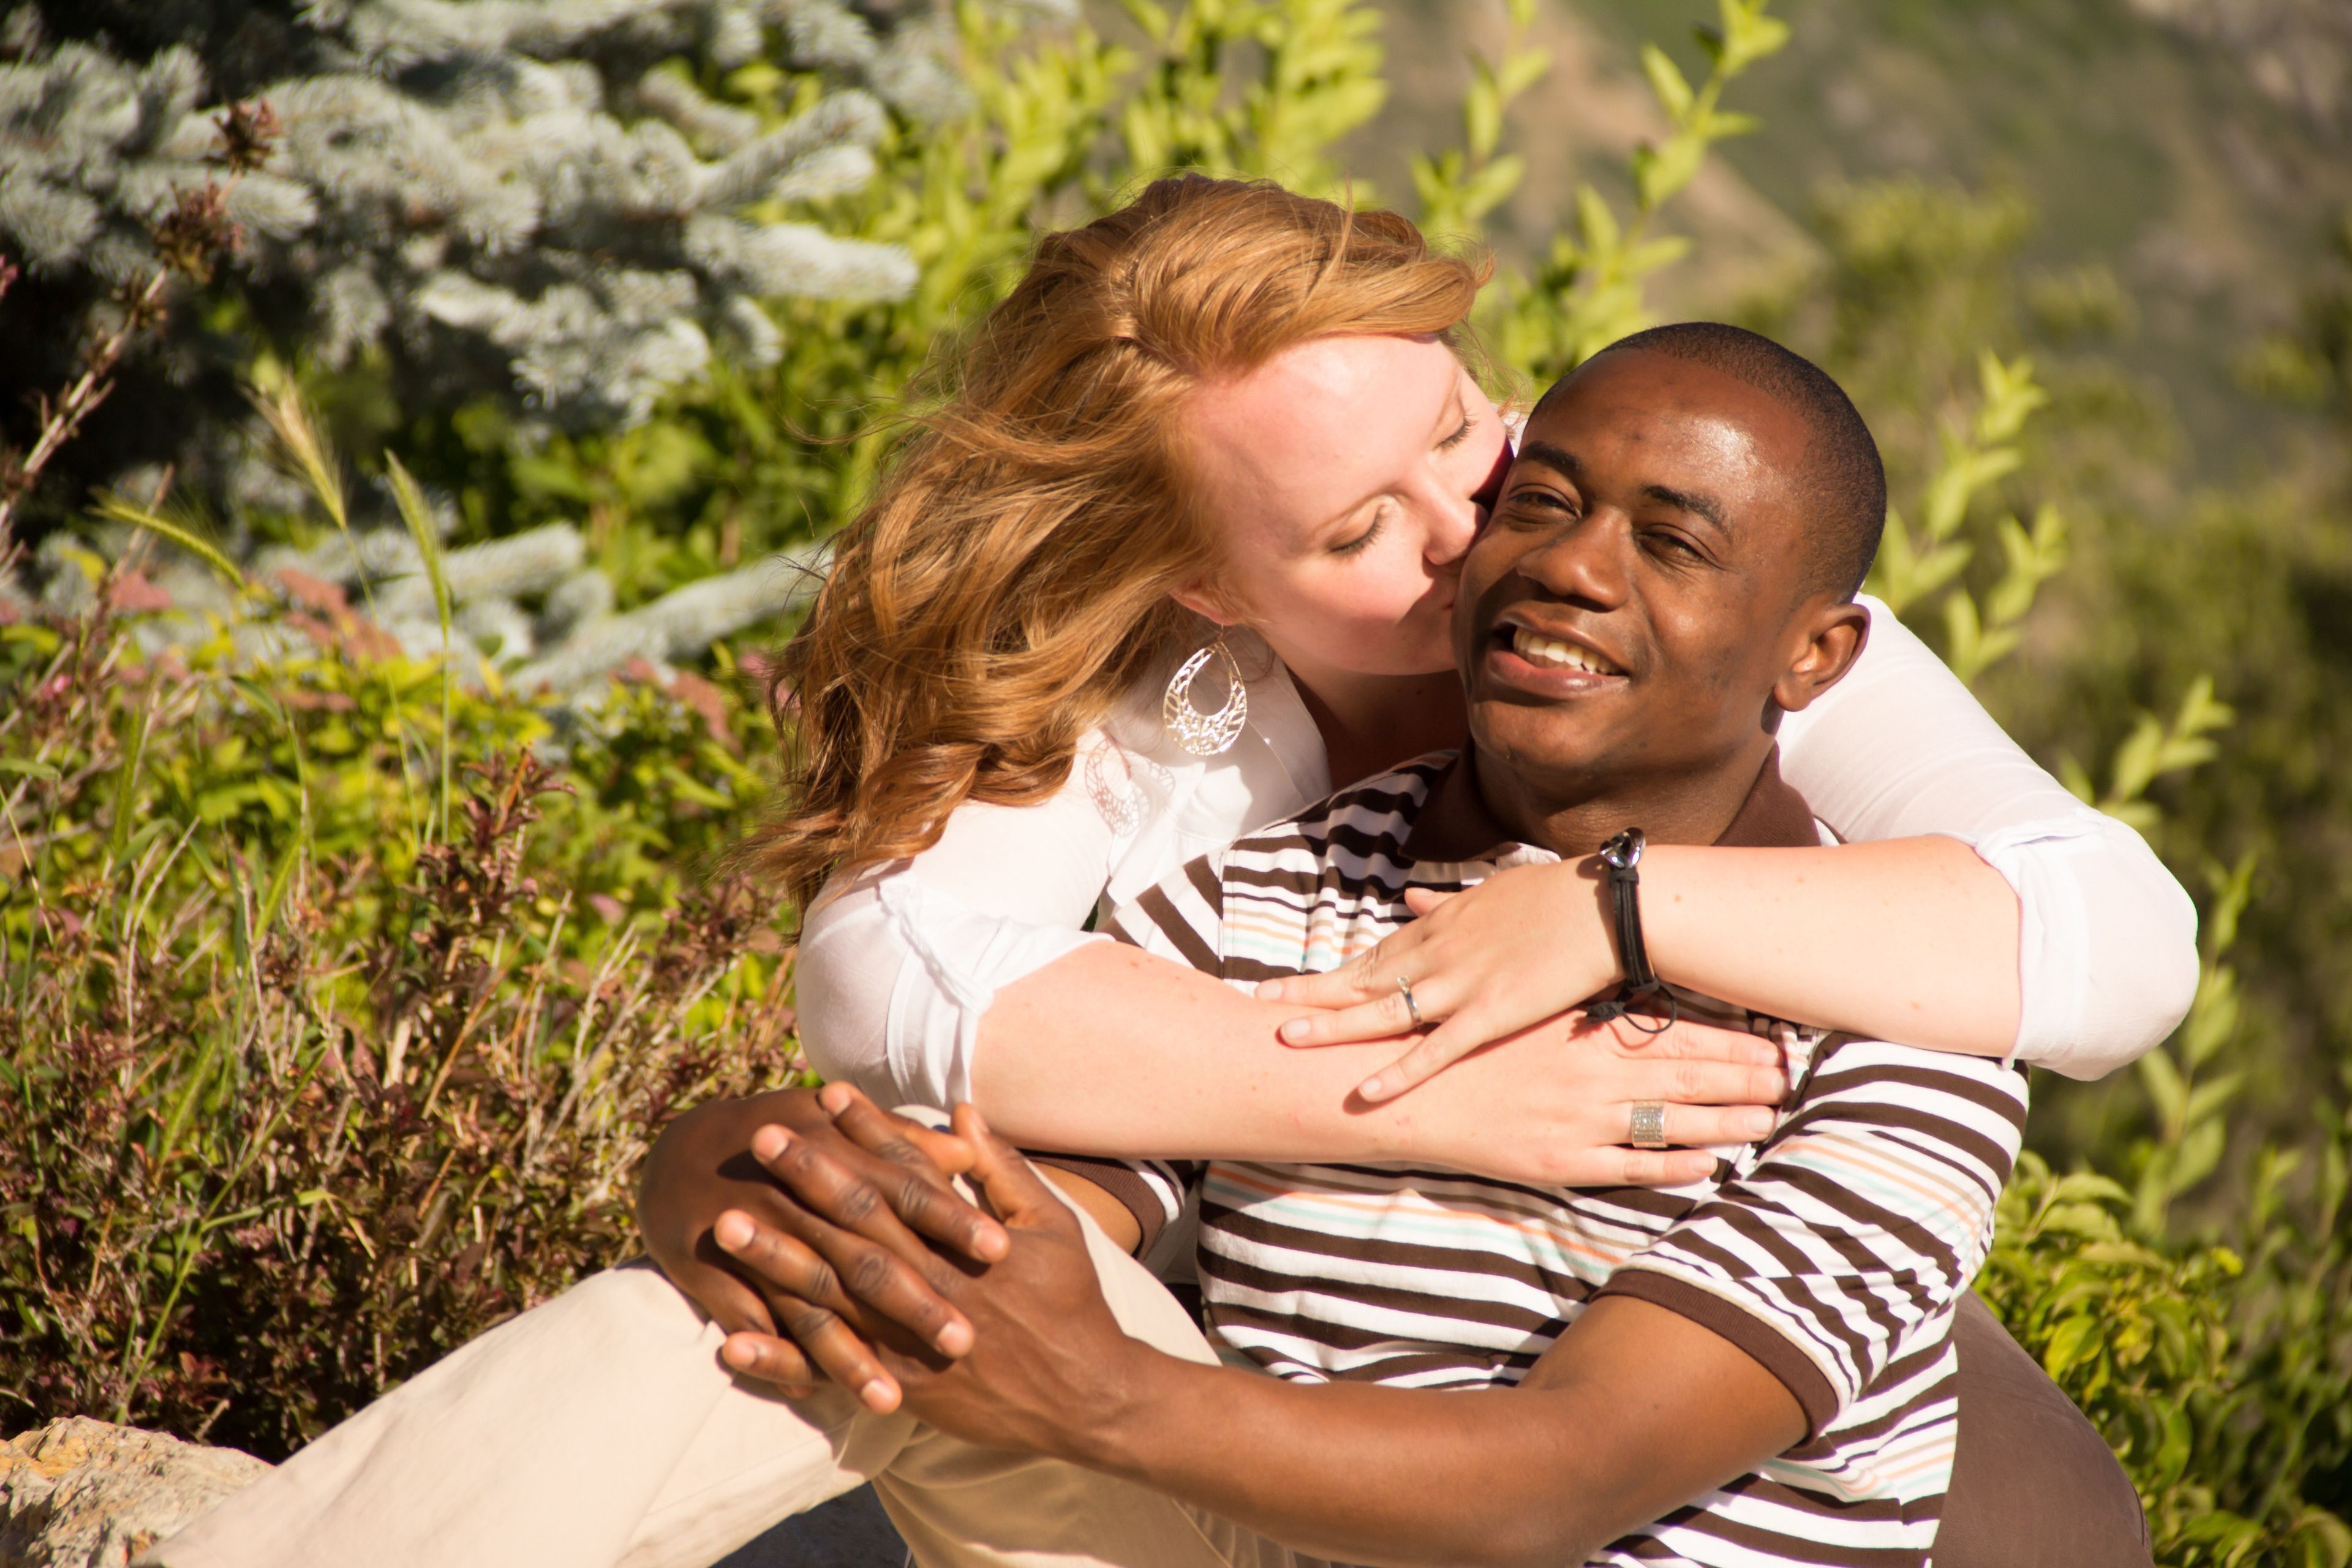 A woman kisses a man’s cheek in an engagement picture.